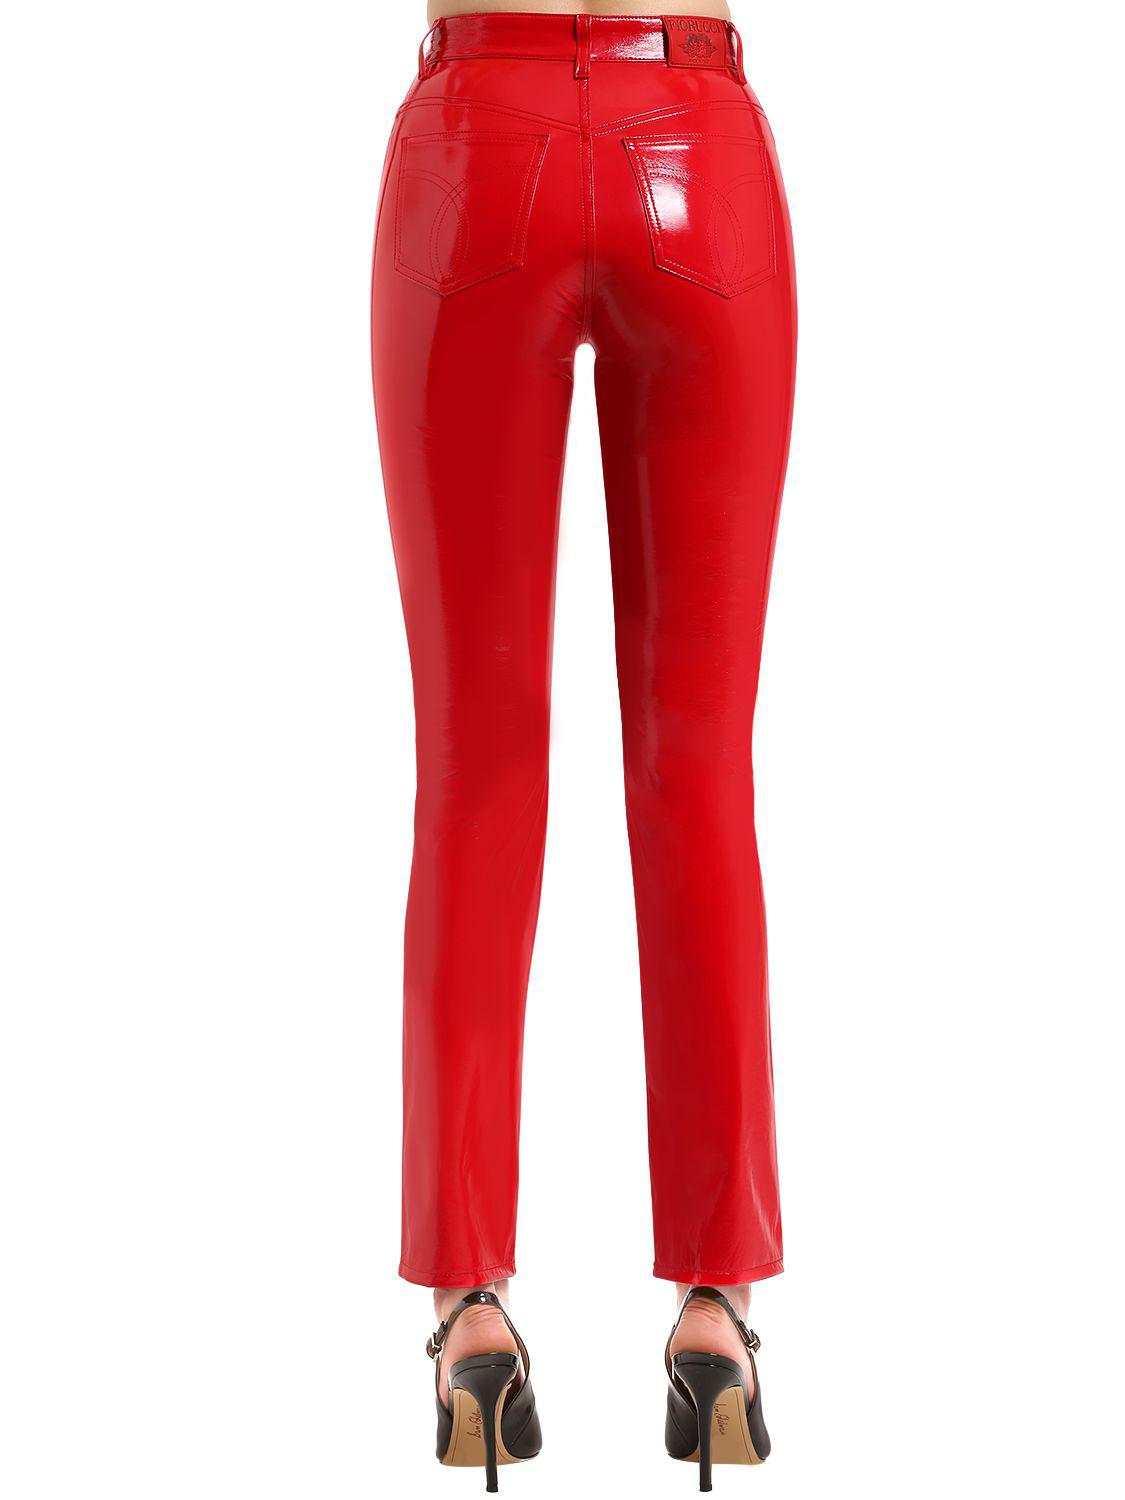 Fiorucci Yves Cigarette Vinyl Pants in Red - Lyst